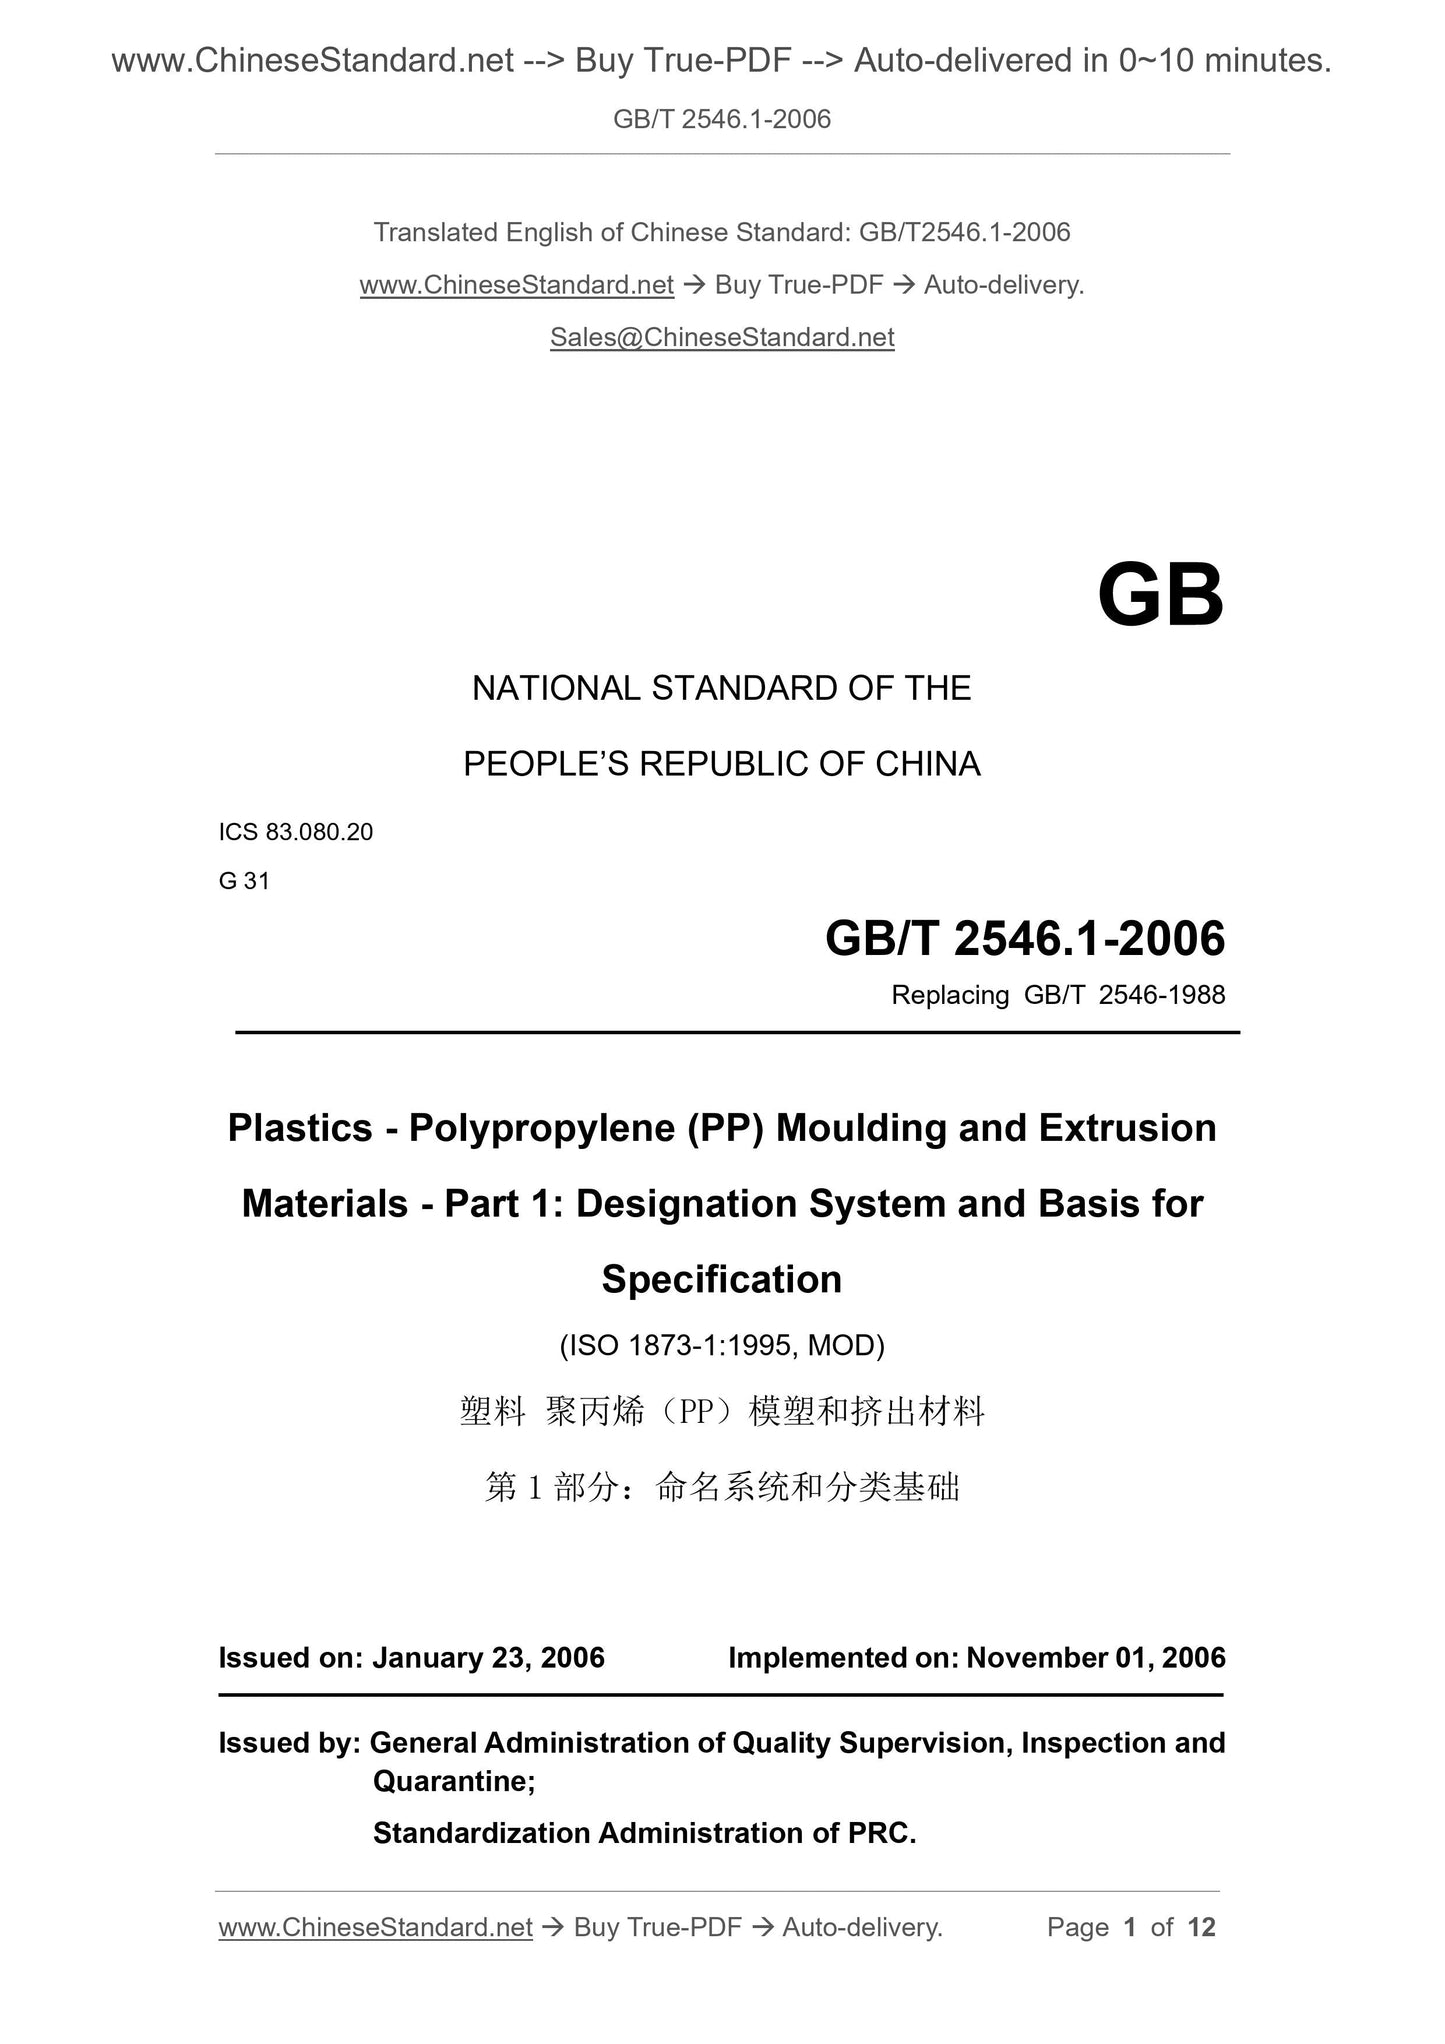 GB/T 2546.1-2006 Page 1